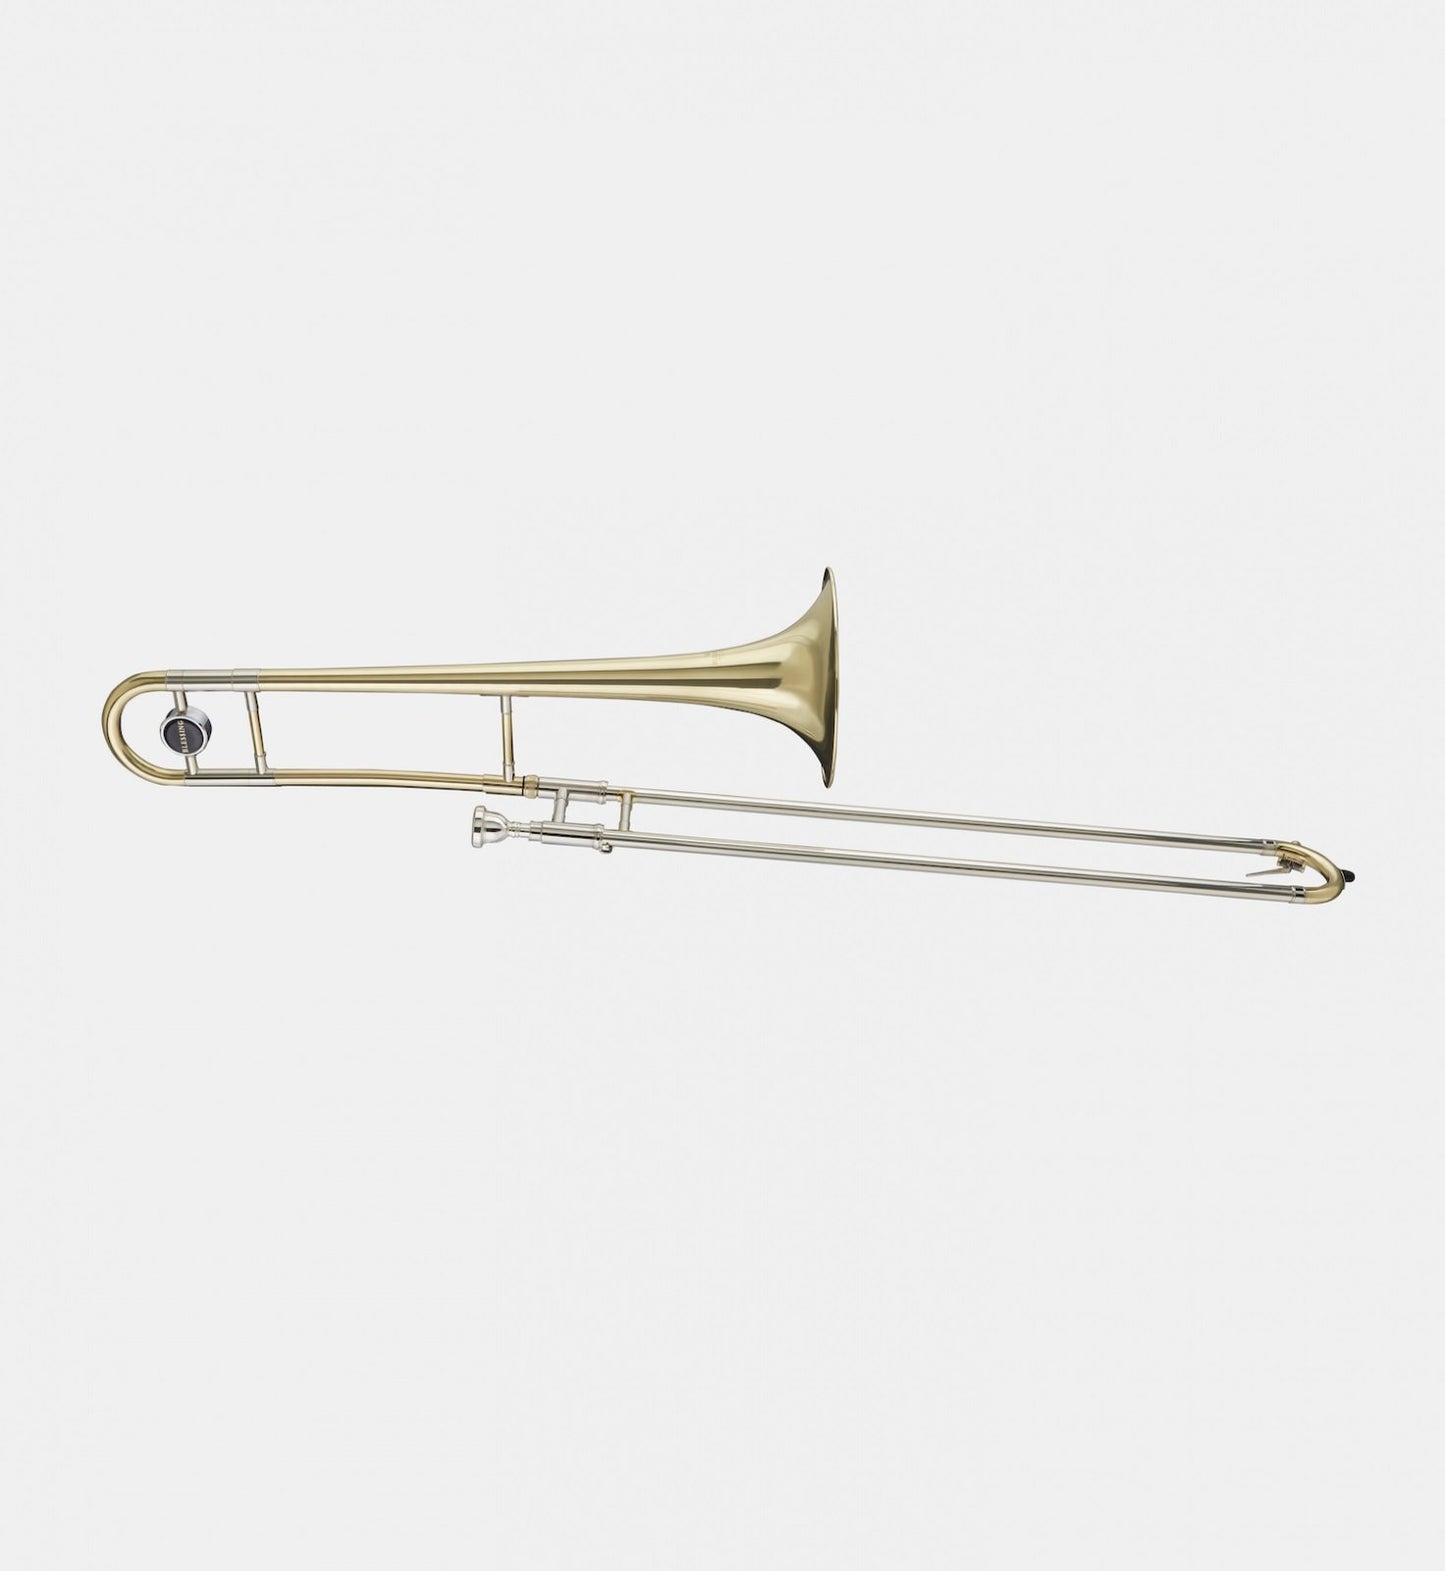 Blessing BTB-1287 Standard Series Student Trombone - Clear Lacquer (NEW)